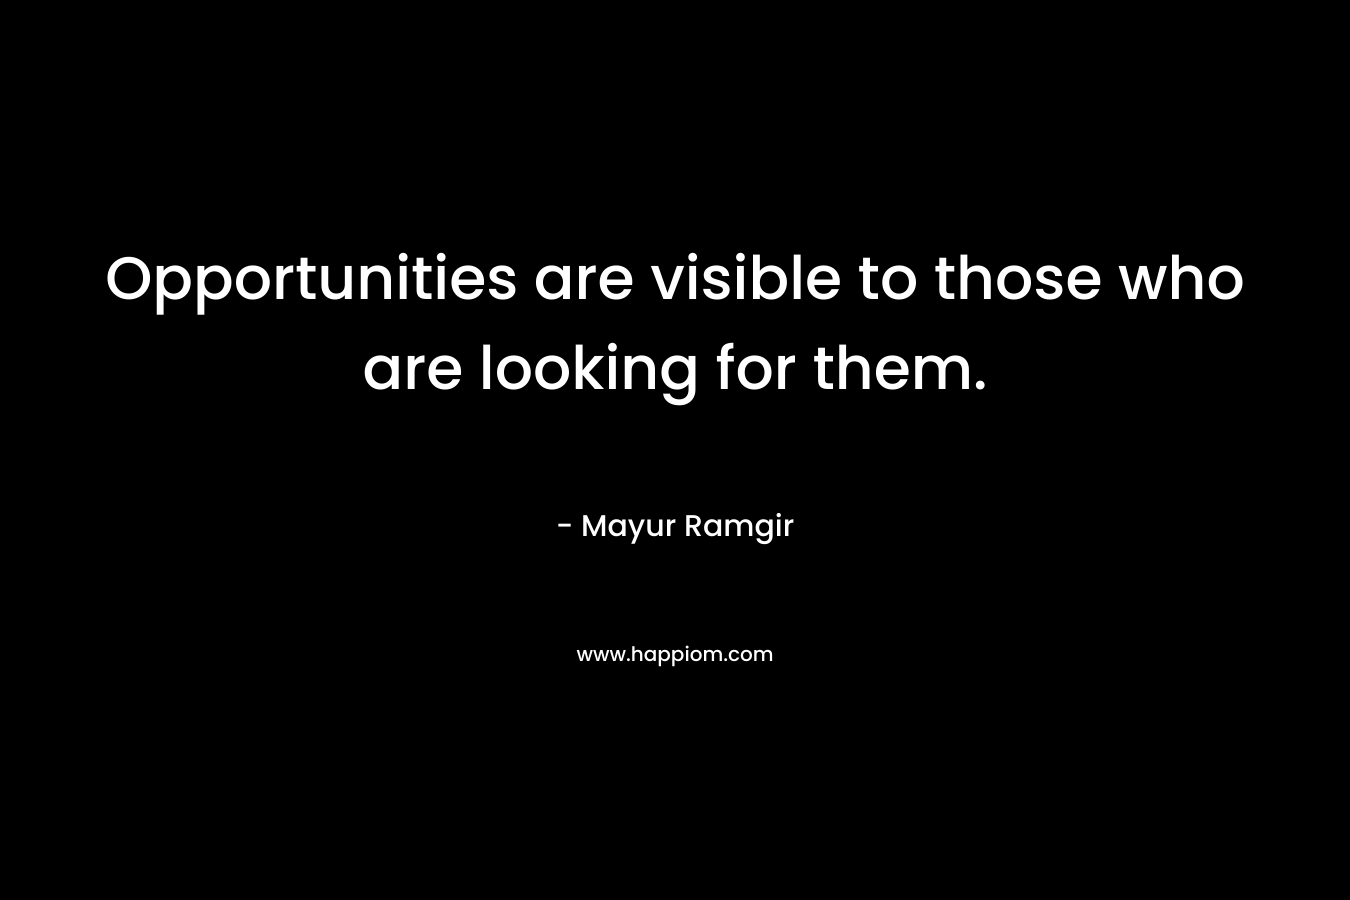 Opportunities are visible to those who are looking for them. – Mayur Ramgir